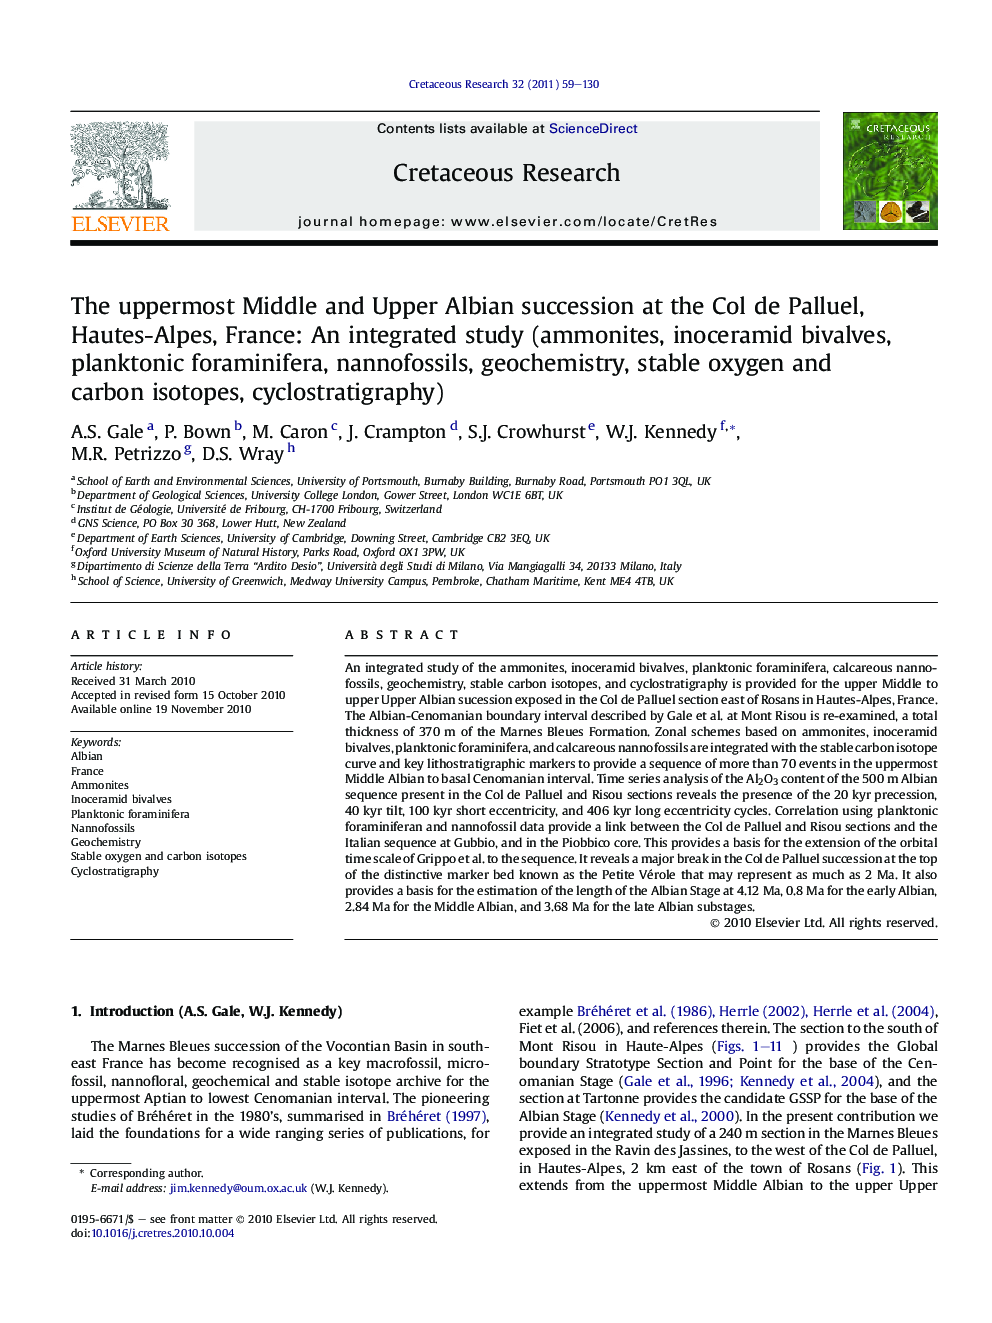 The uppermost Middle and Upper Albian succession at the Col de Palluel, Hautes-Alpes, France: An integrated study (ammonites, inoceramid bivalves, planktonic foraminifera, nannofossils, geochemistry, stable oxygen and carbon isotopes, cyclostratigraphy)